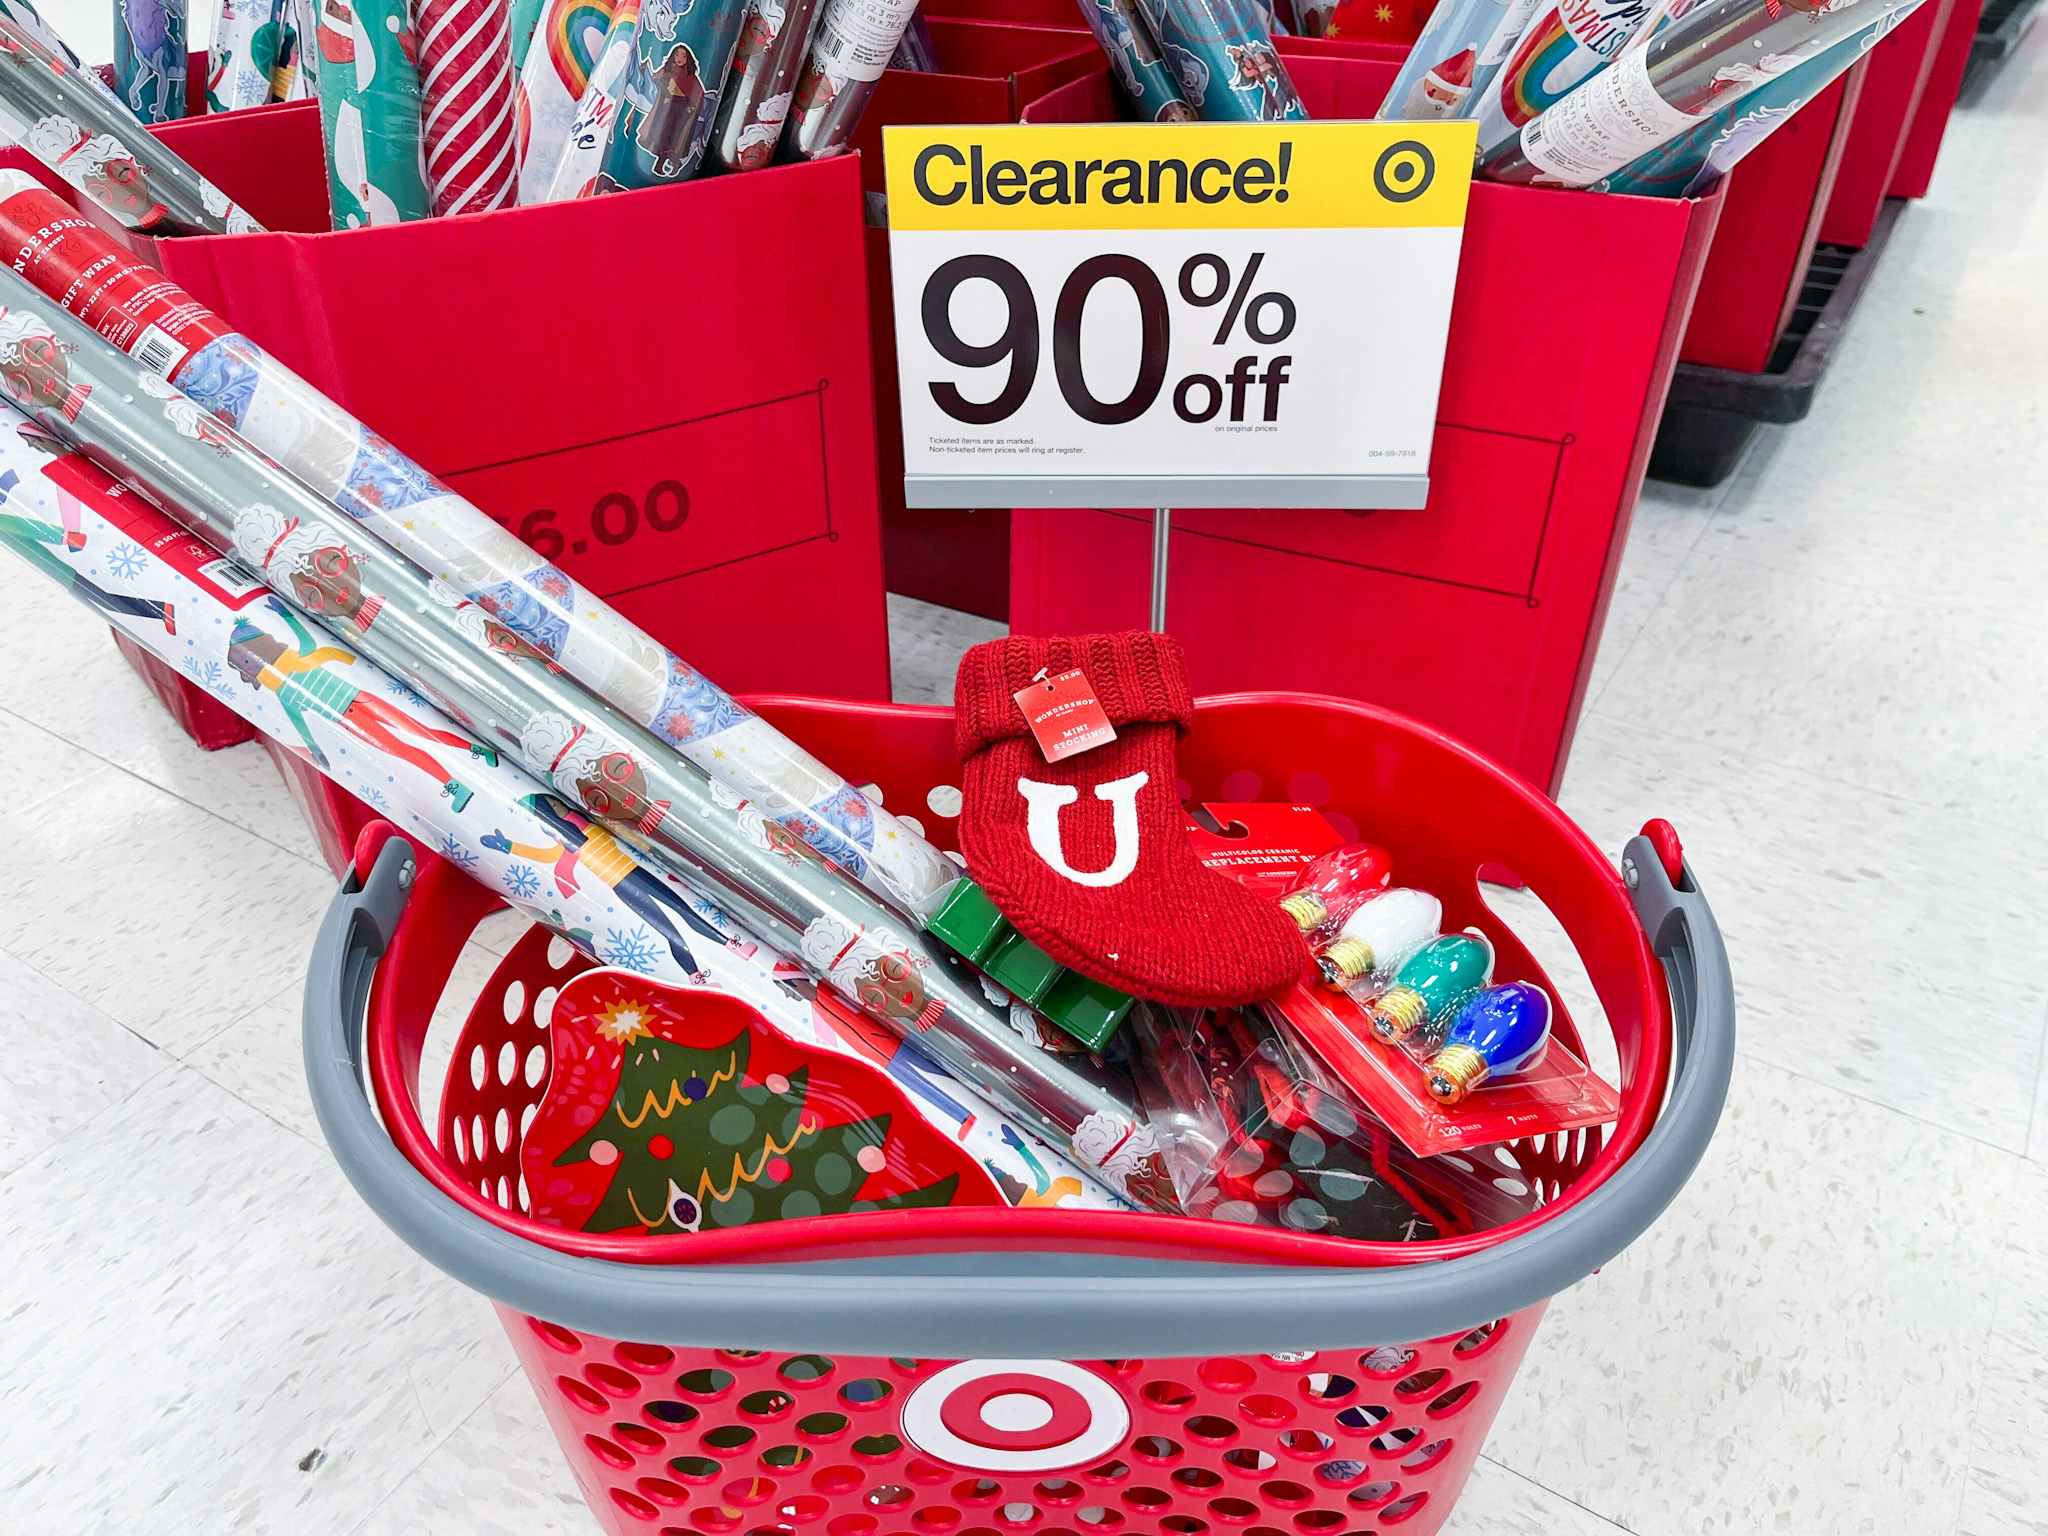 Shopping basket at Target next to a 90% off sign.